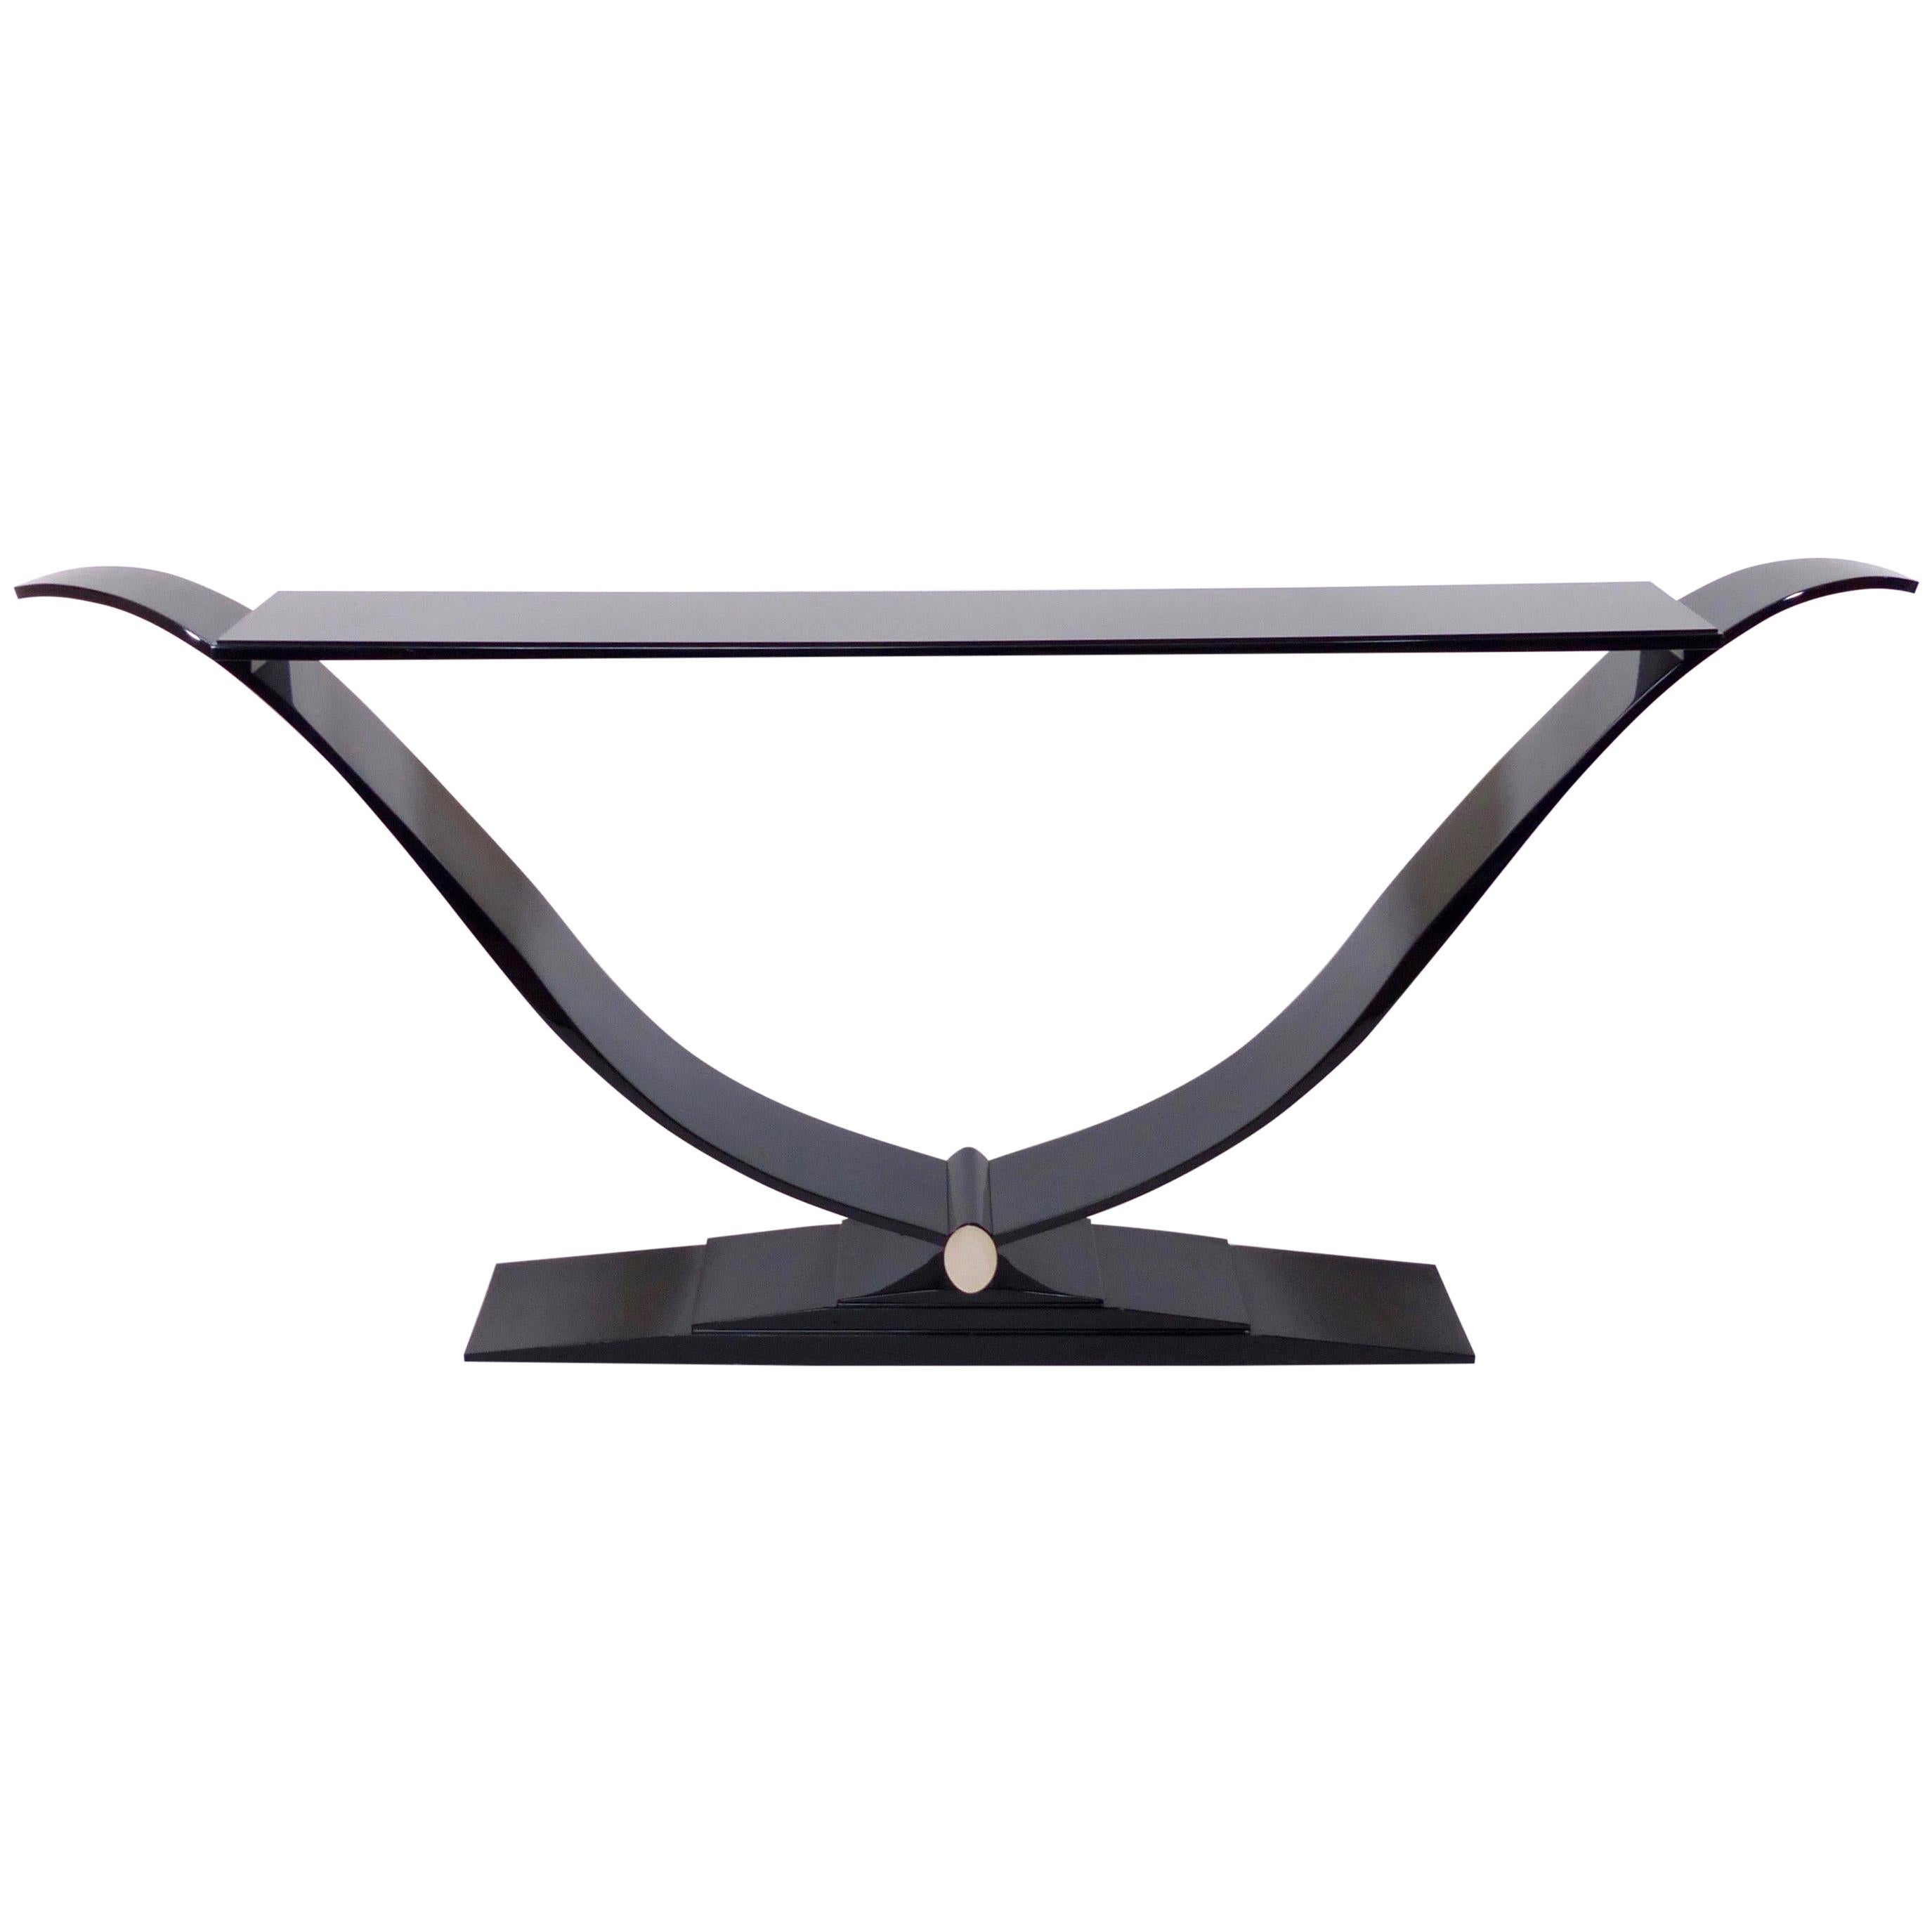 Long Slender Art Deco Style Console Table in Black Piano Lacquer